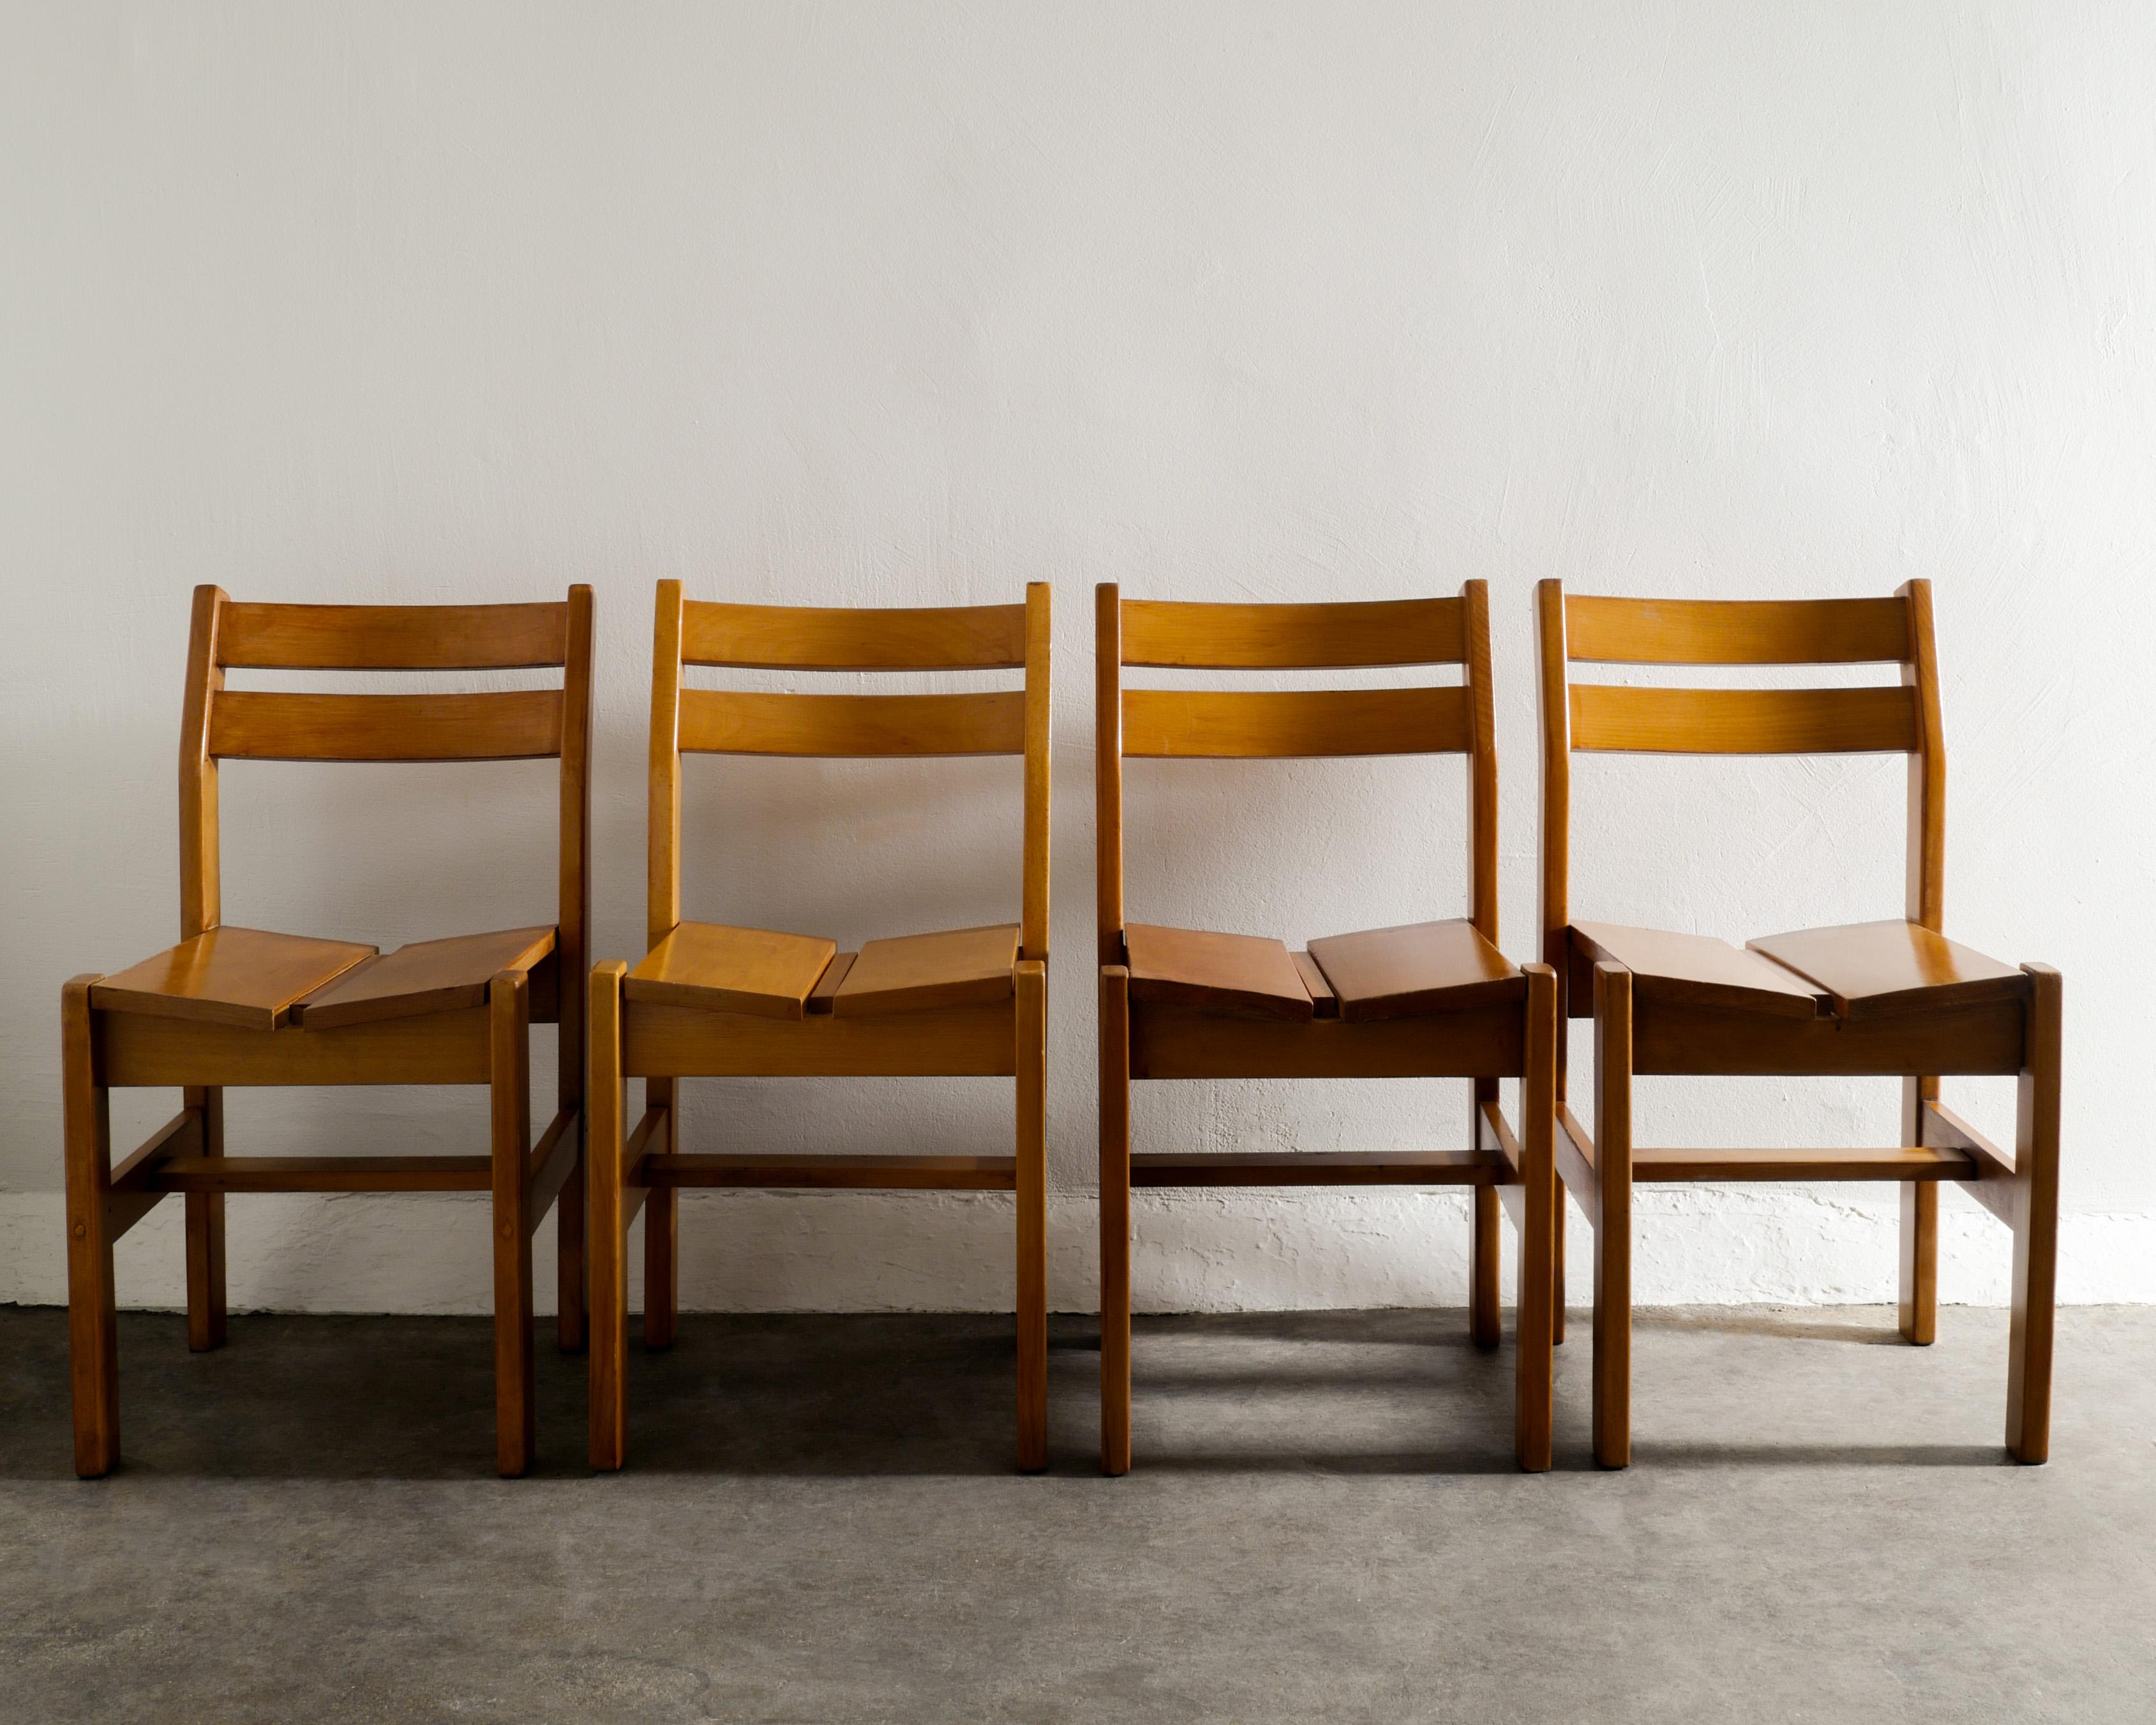 Rare set of four mid century dining chairs in elm wood by Charlotte Perriand produced for Les Arcs in France 1960s. In good original condition with matching patina. 

Dimensions: H: 31.11 in (79 cm) W: 16.15 in (41 cm) D: 17.72 in (45 cm) SH: 16.93